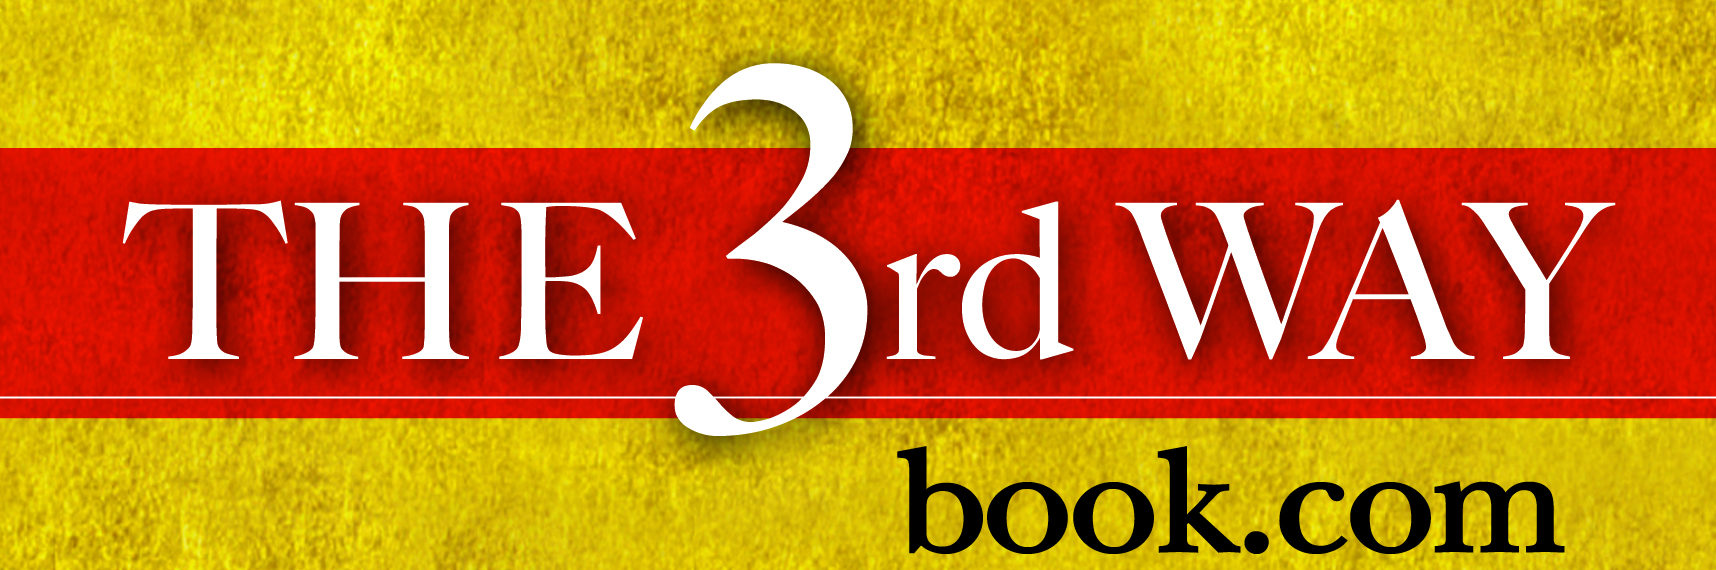 THE 3rd WAY Book